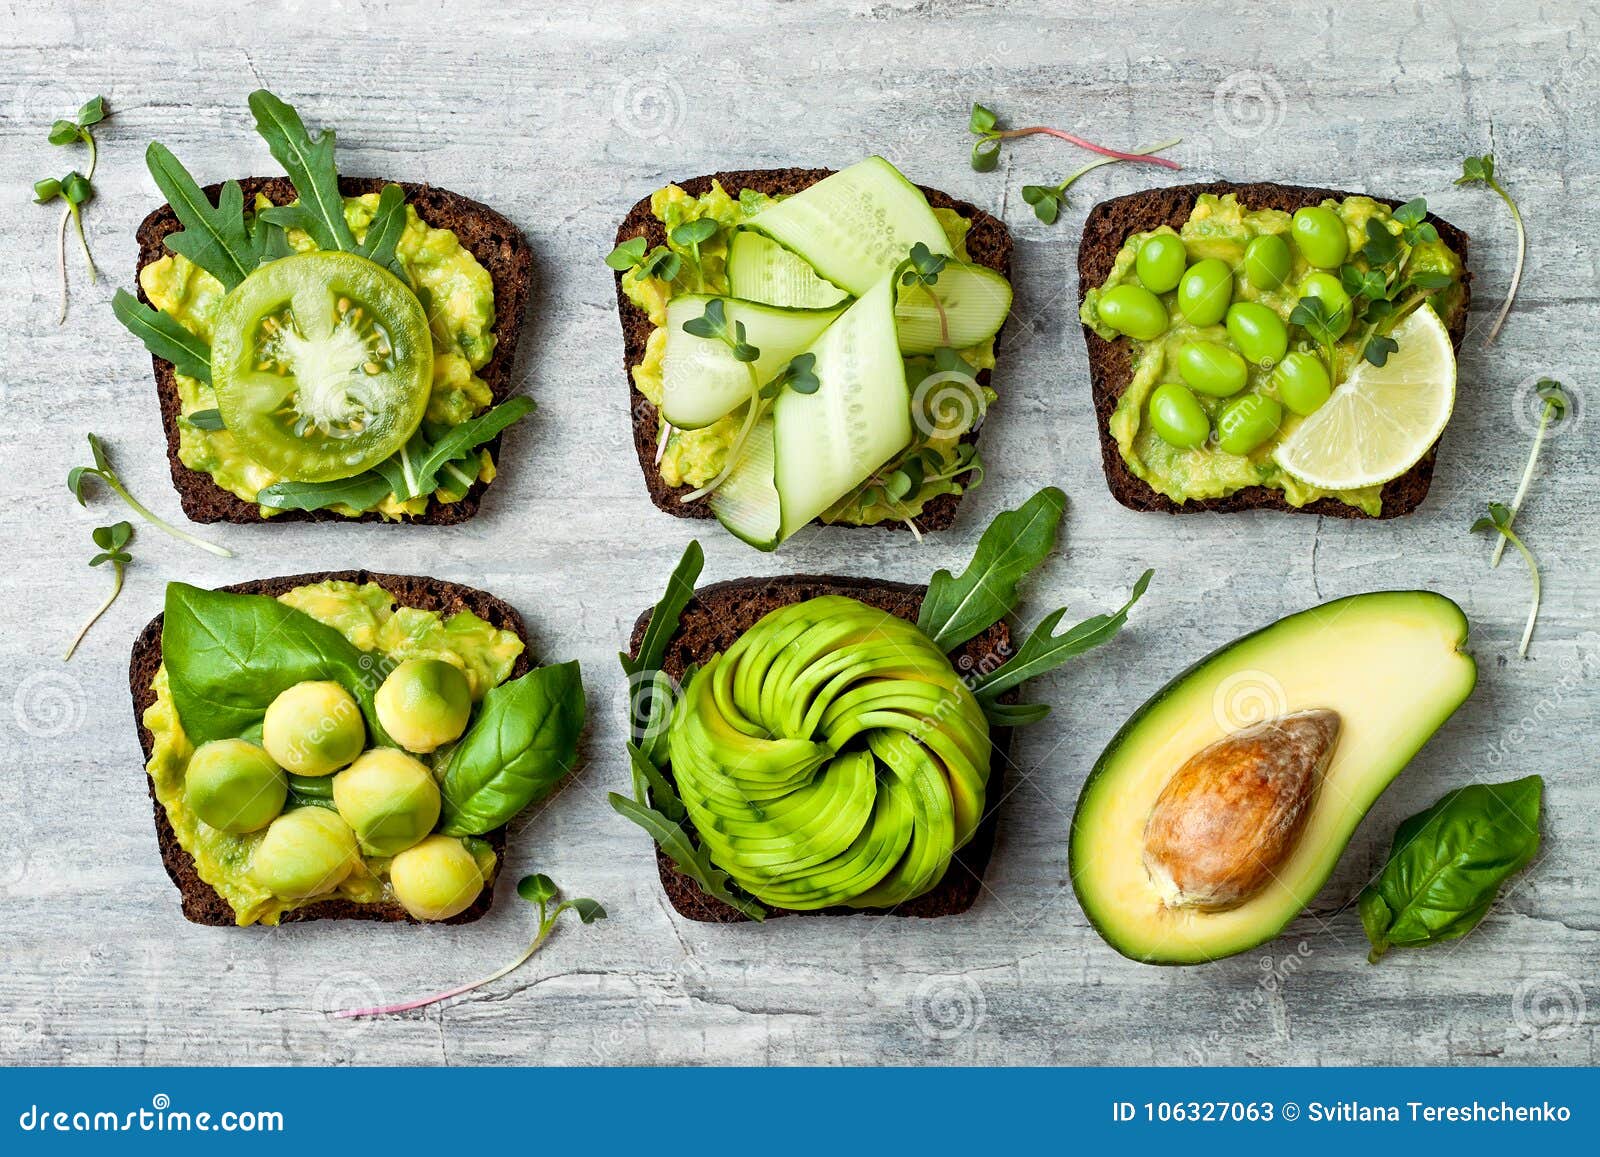 fresh avocado toasts with different toppings. healthy vegetarian breakfast with rye wholegrain sandwiches.